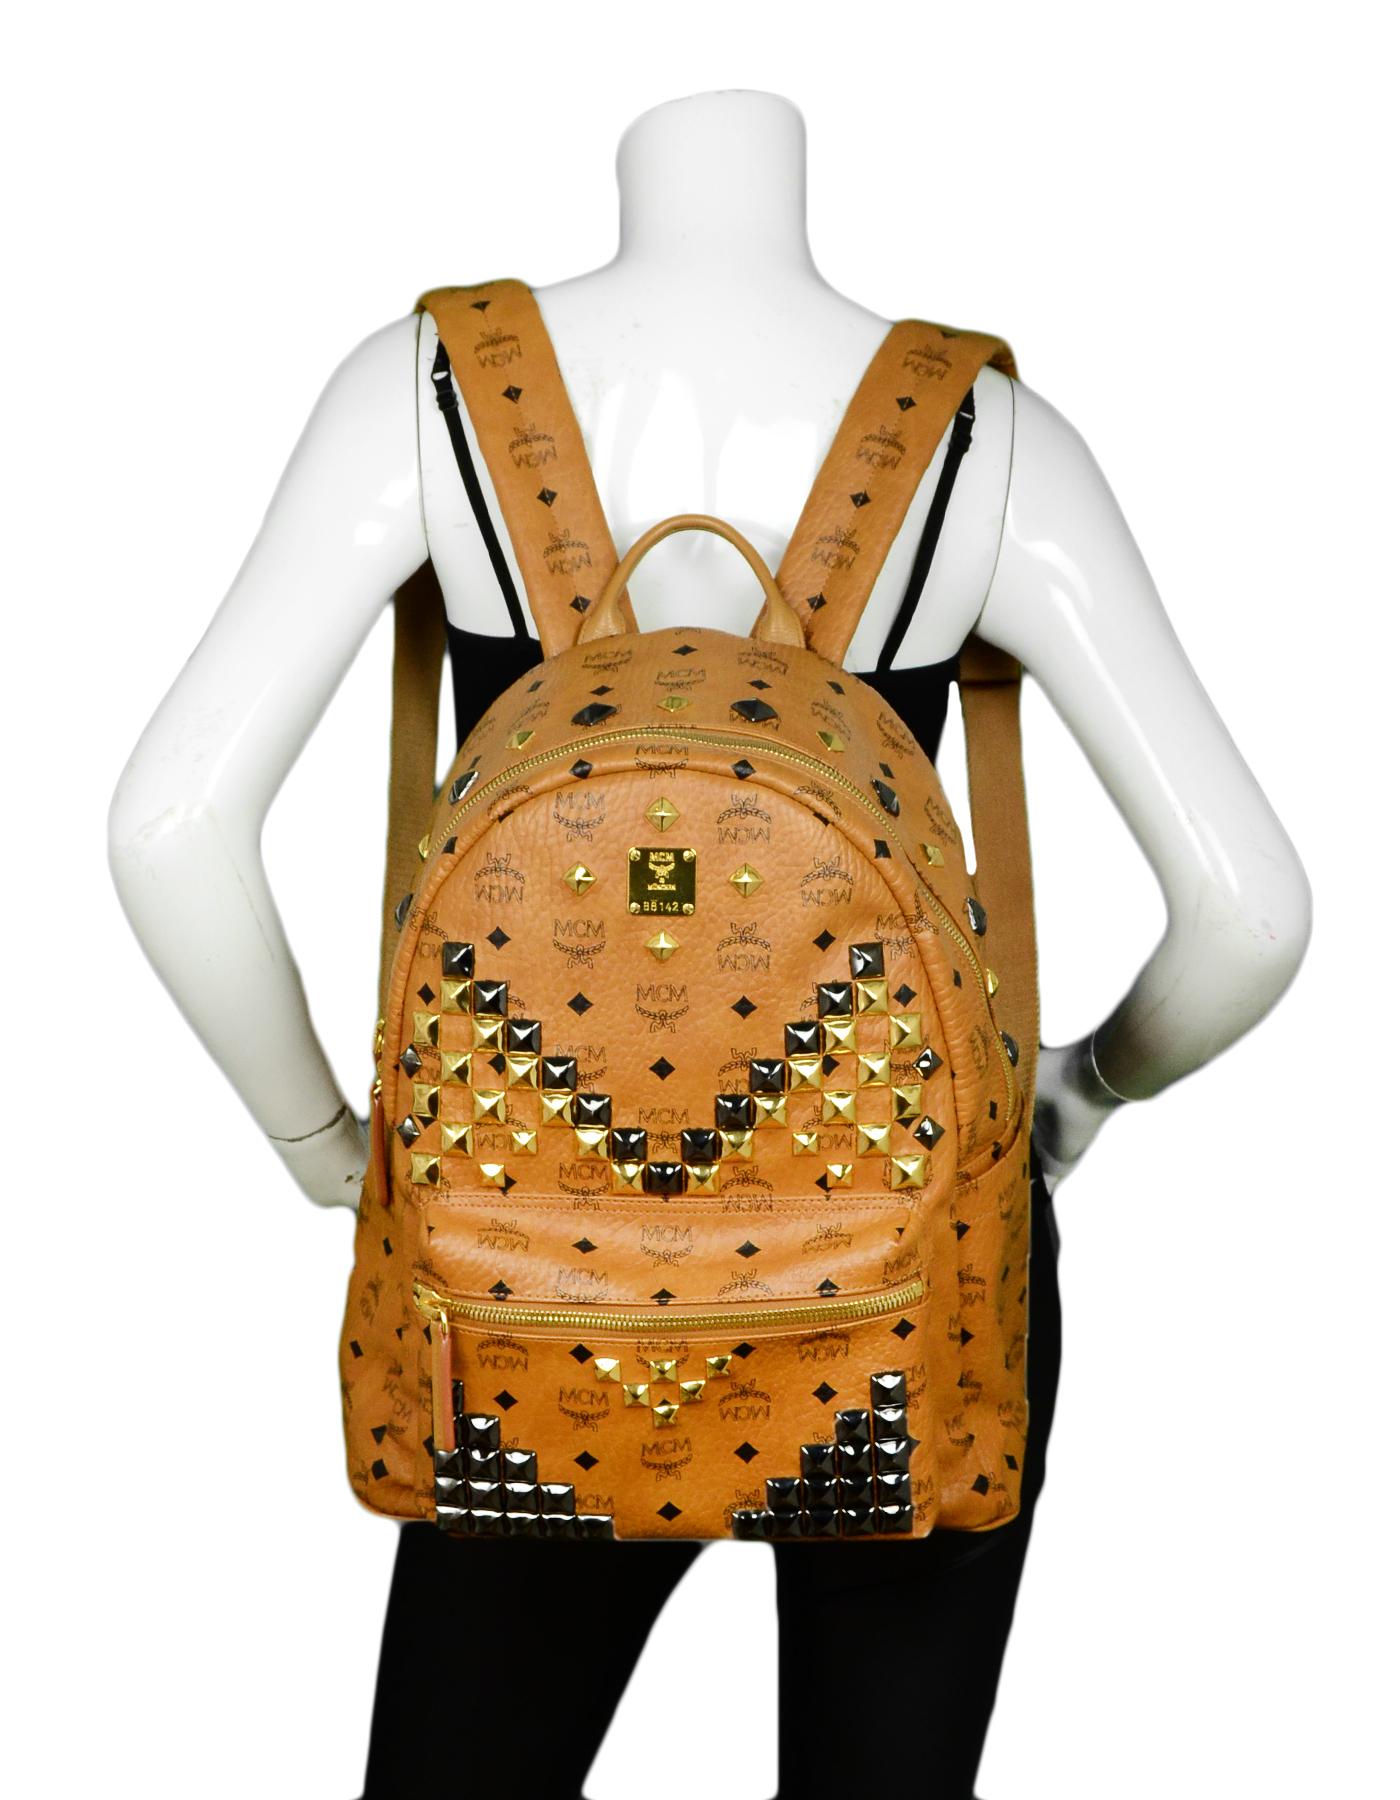 MCM Tan Monogram Star M Stud Large Backpack

Made In: Korea
Color: Tan
Hardware: Goldtone 
Materials: Leather
Lining: Fine leather textile
Closure/Opening: Top zip pocket 
Exterior Pockets: Front zip pocket, two flat pockets
Interior Pockets: Two